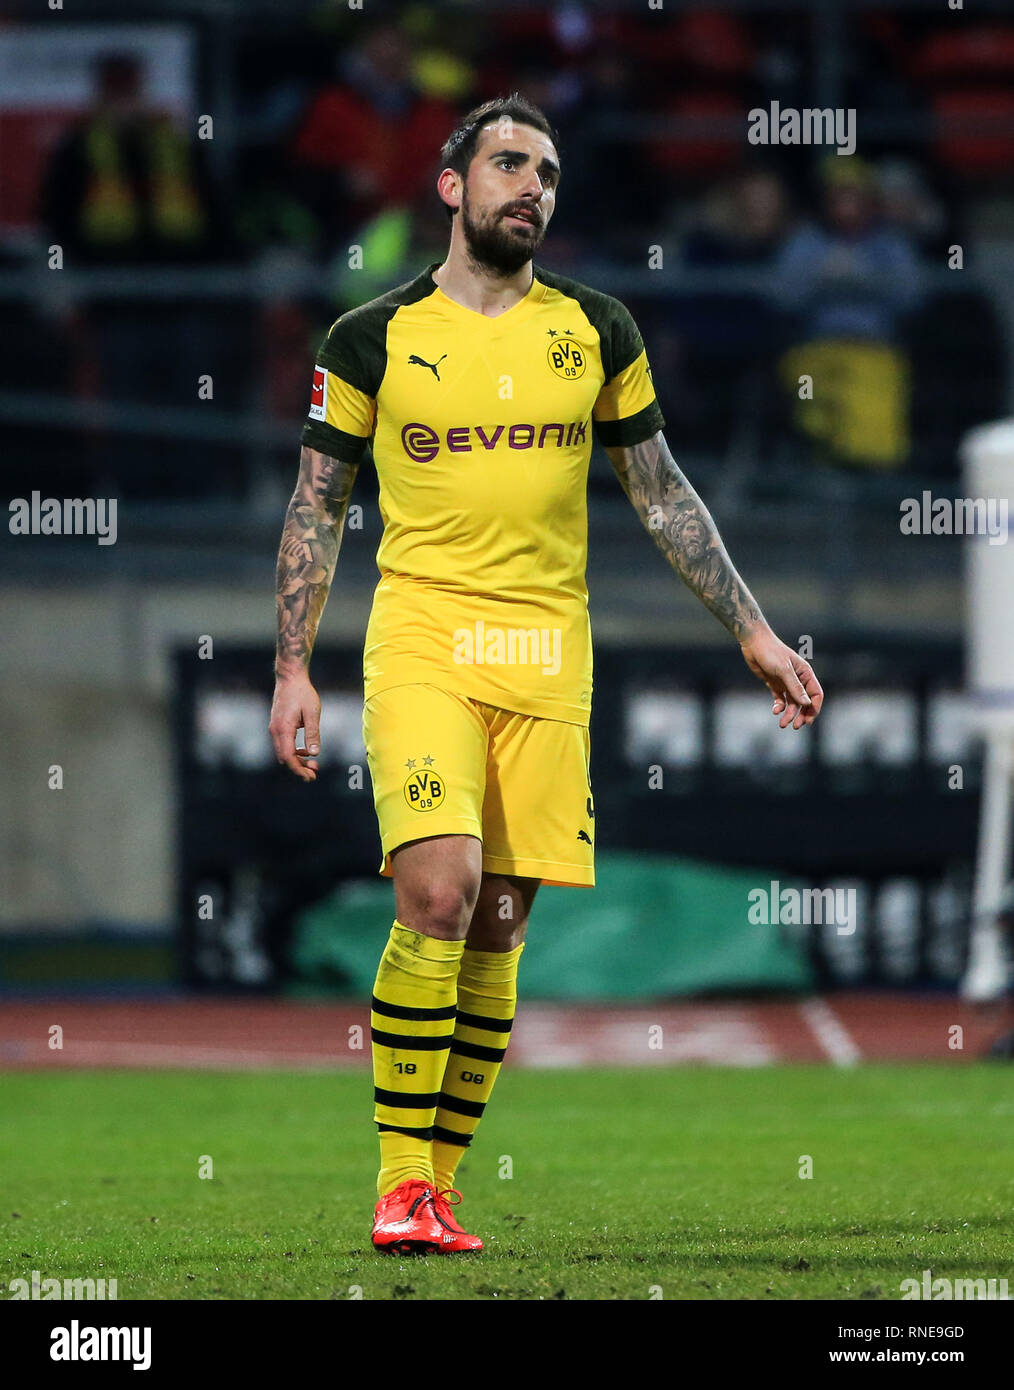 Nuremberg, Germany. 18th Feb, 2019. Dortmund's Paco Alcacer reacts during a German Bundesliga match between 1. FC Nuremberg and Borussia Dortmund in Nuremberg, Germany, Feb. 18, 2019. The match ended 0-0. Credit: Philippe Ruiz/Xinhua/Alamy Live News Stock Photo